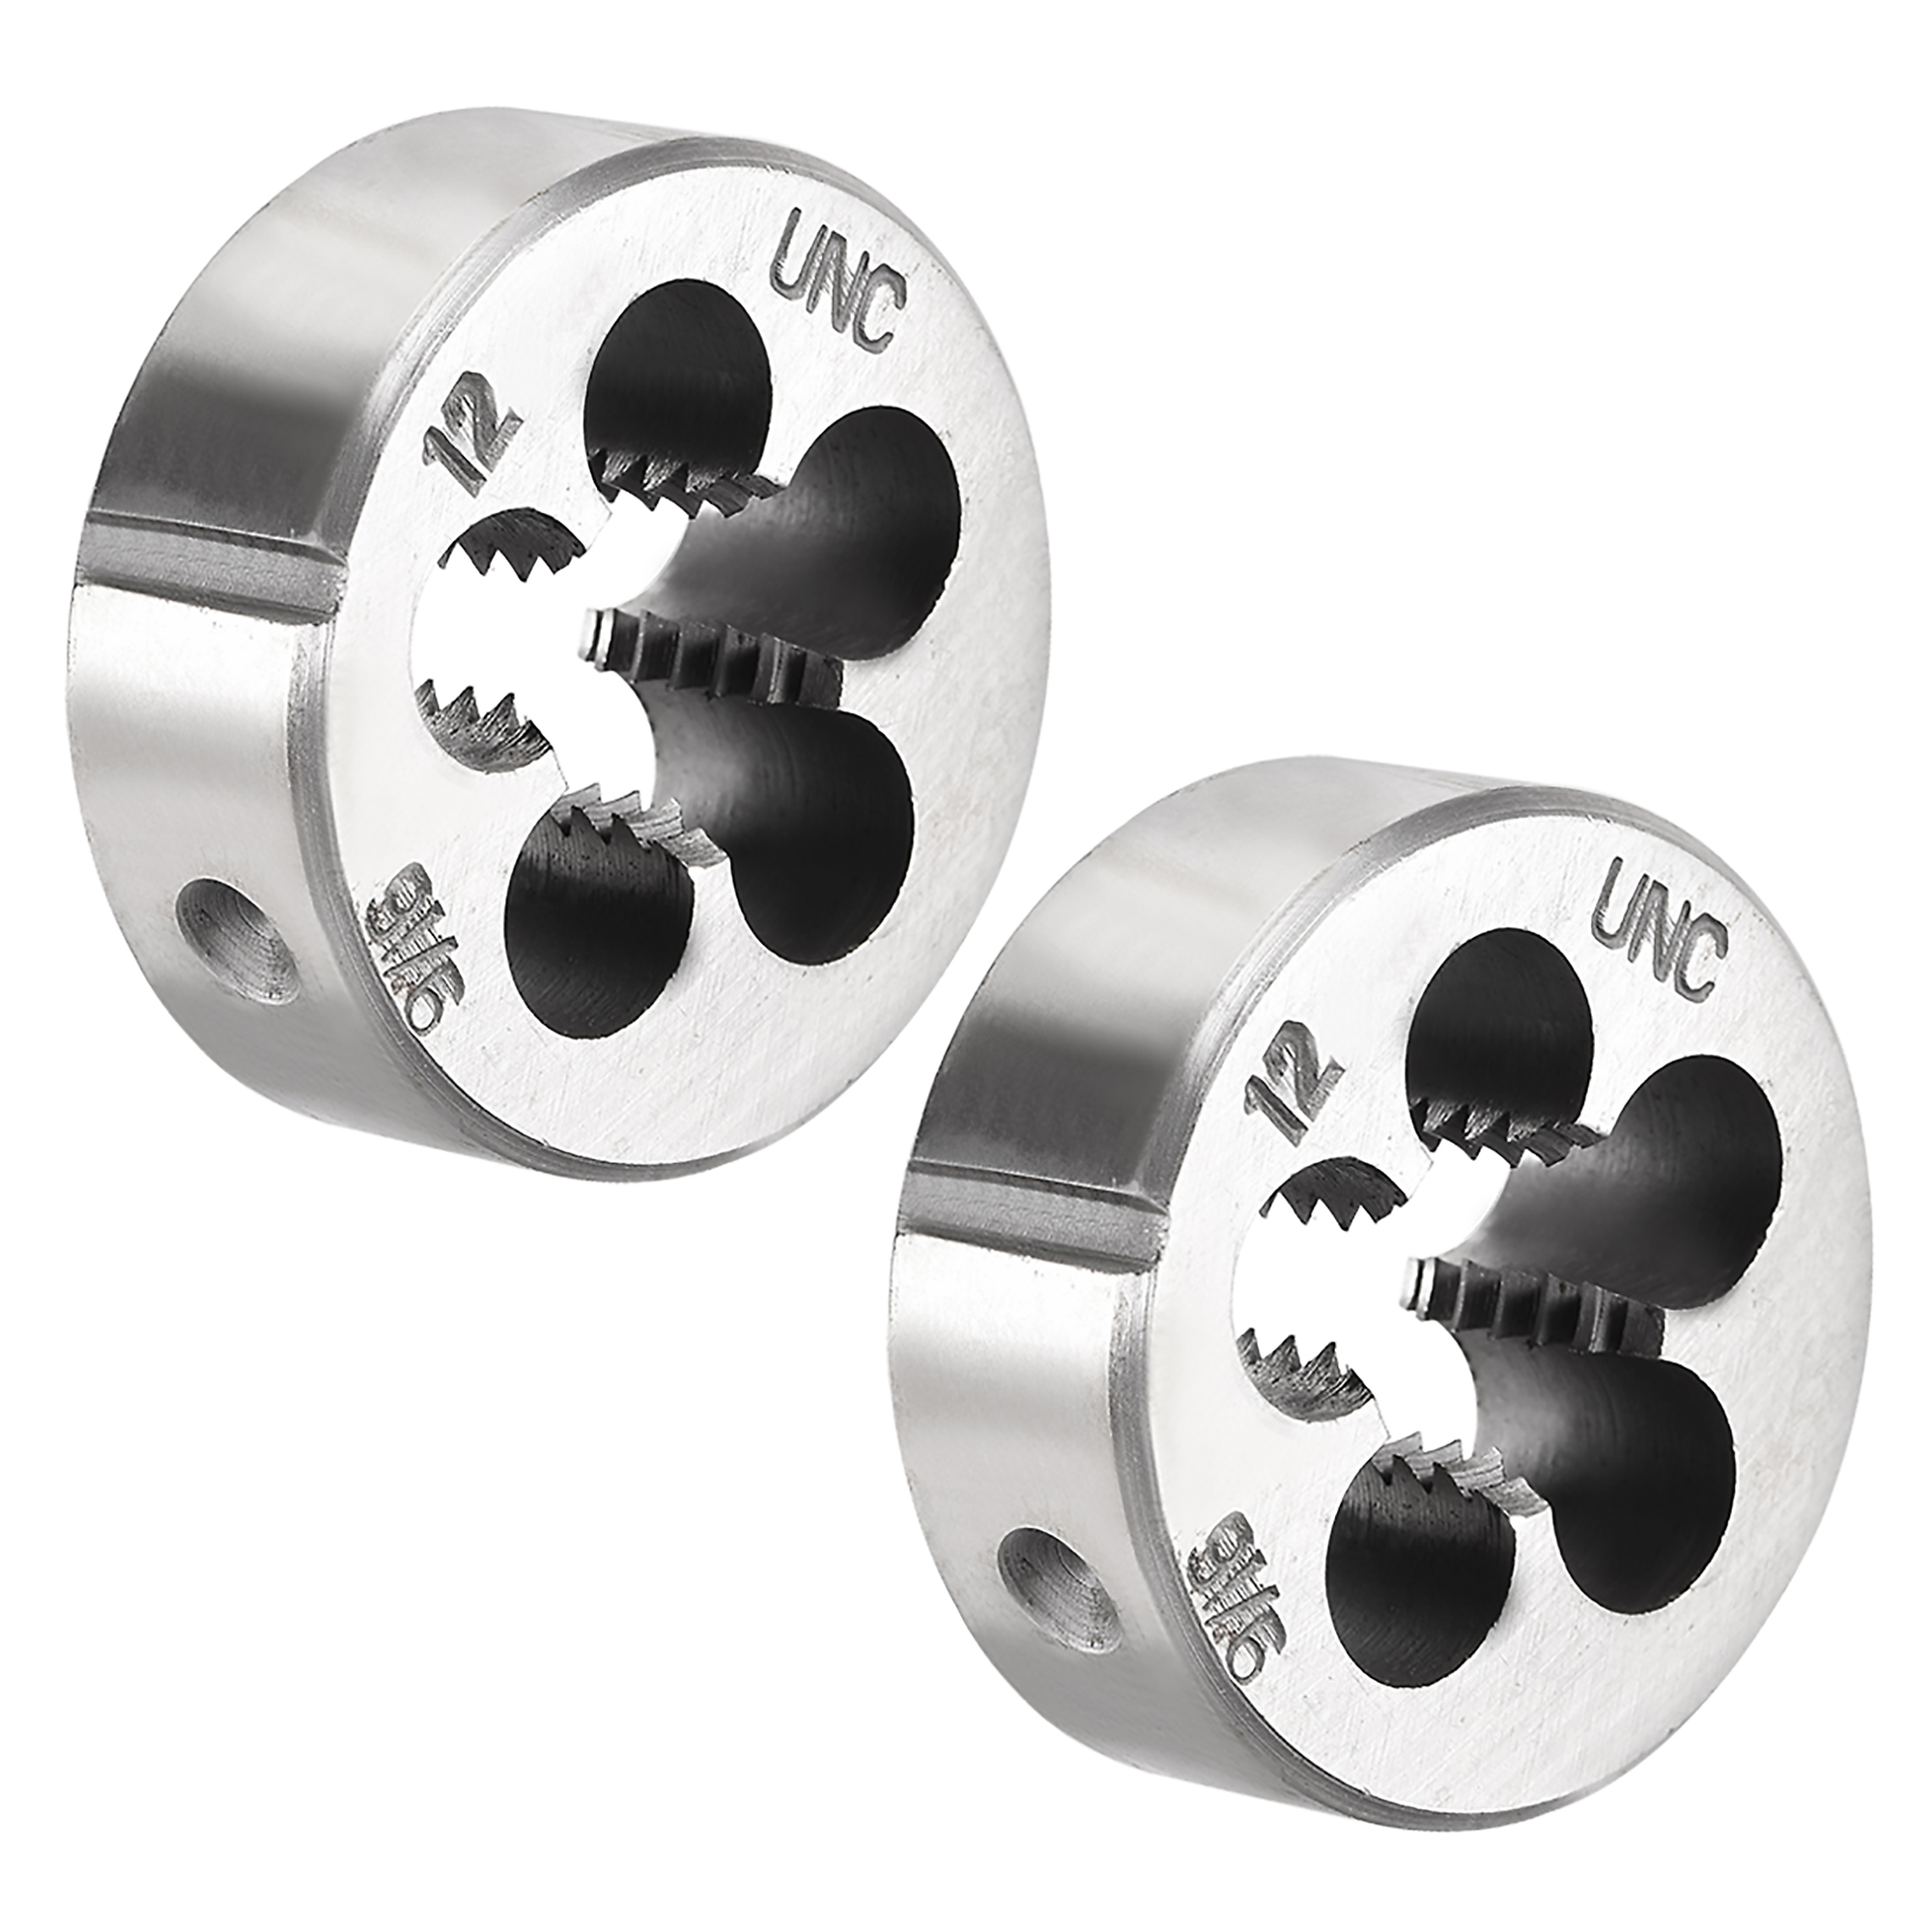 Uxcell 9/16-12 UNC Alloy Tool Steel Machine Thread Round Threading Dies 2 Pack - image 1 of 3